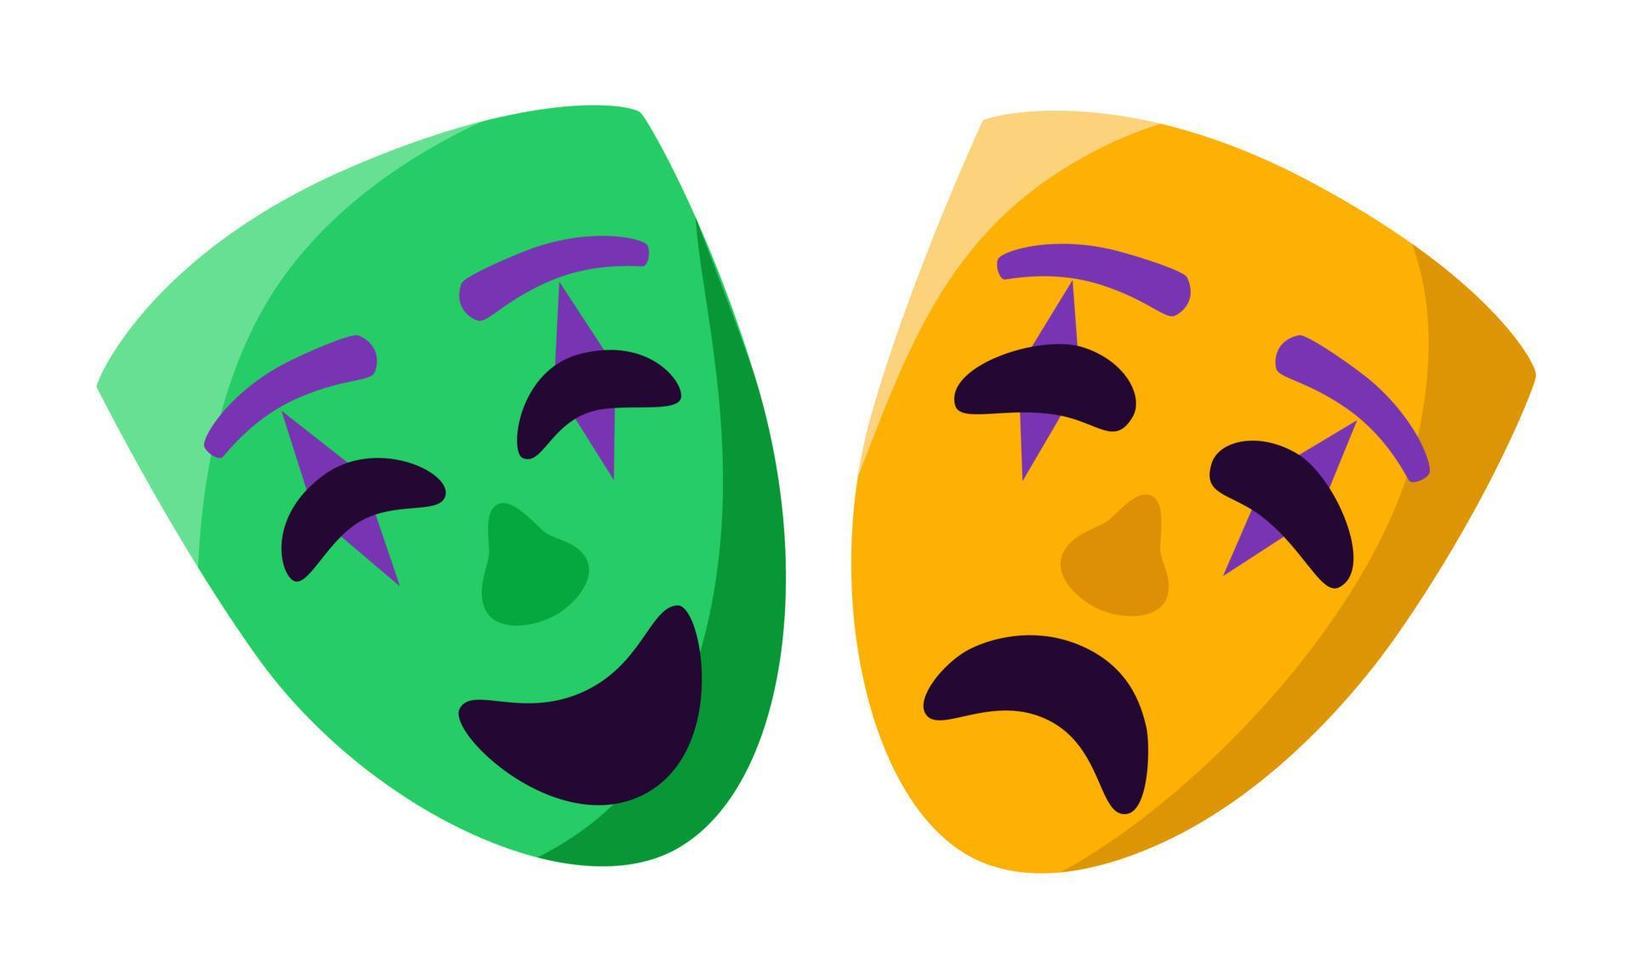 Happy and sad masks vector illustration. Joy and agony face expression. Theatre and carnival decoration stuff. Different mood masks